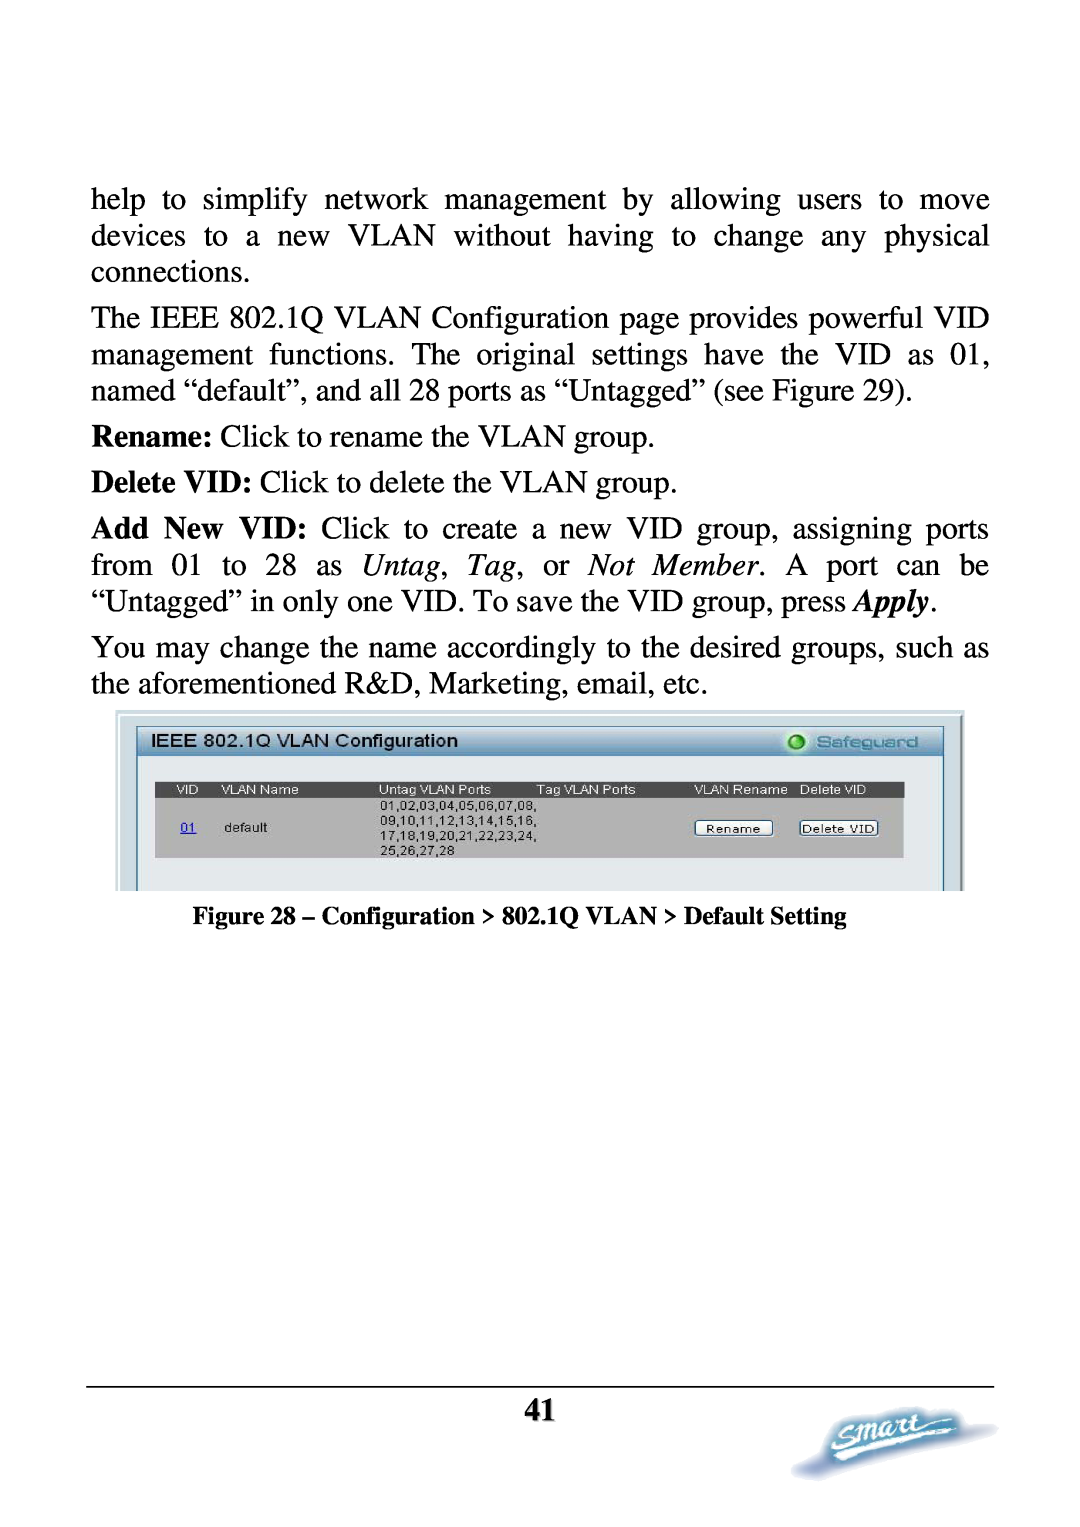 D-Link DES-1228P user manual Rename Click to rename the VLAN group 